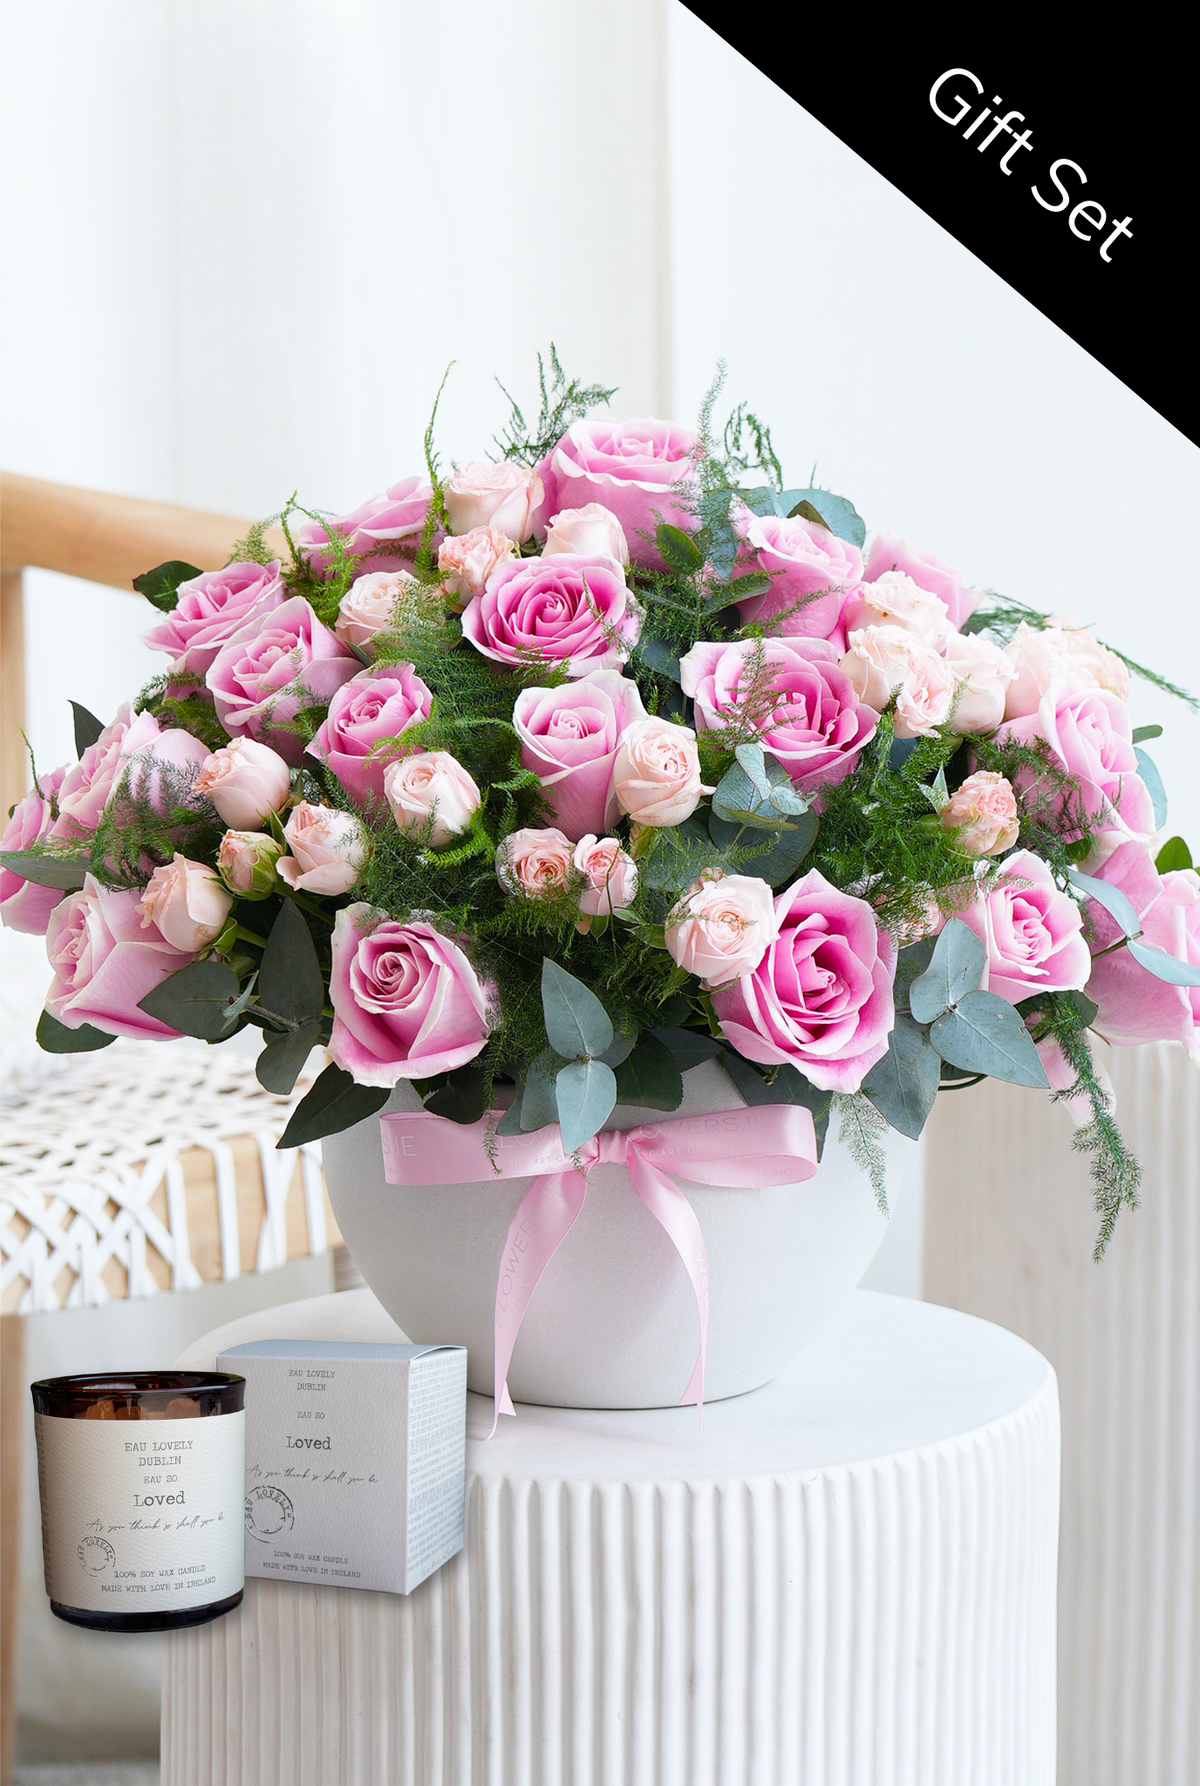 Valentine 24 Pretty Pink Rose Luxury - Arrangement with Scented Candle